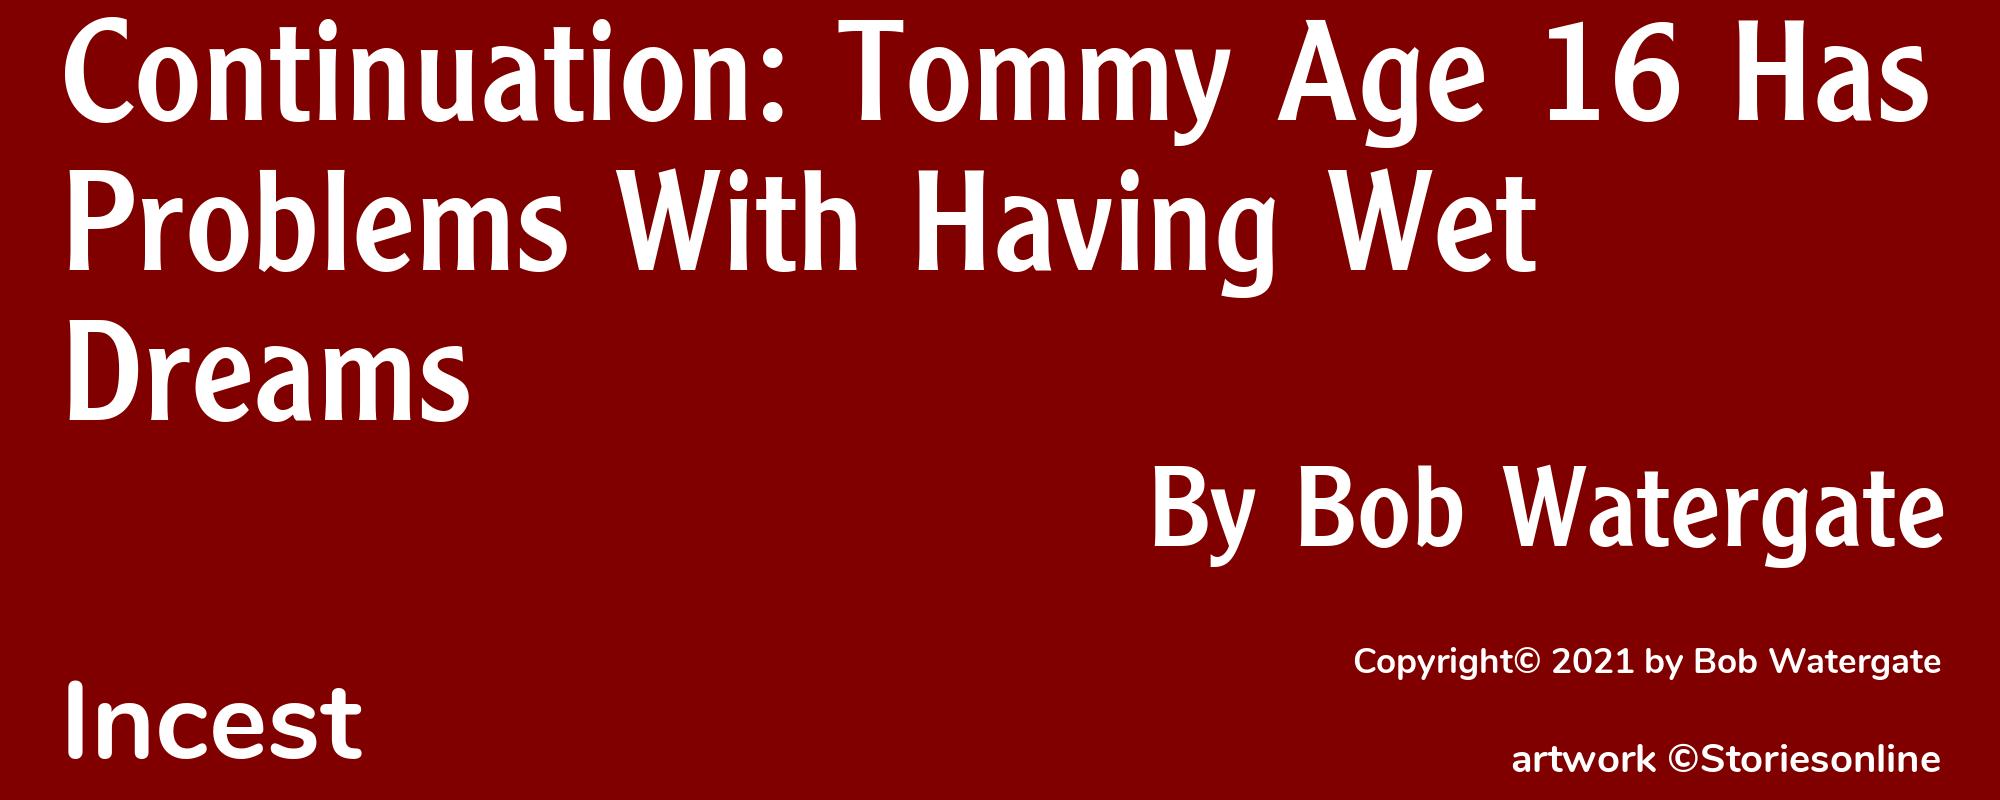 Continuation: Tommy Age 16 Has Problems With Having Wet Dreams - Cover